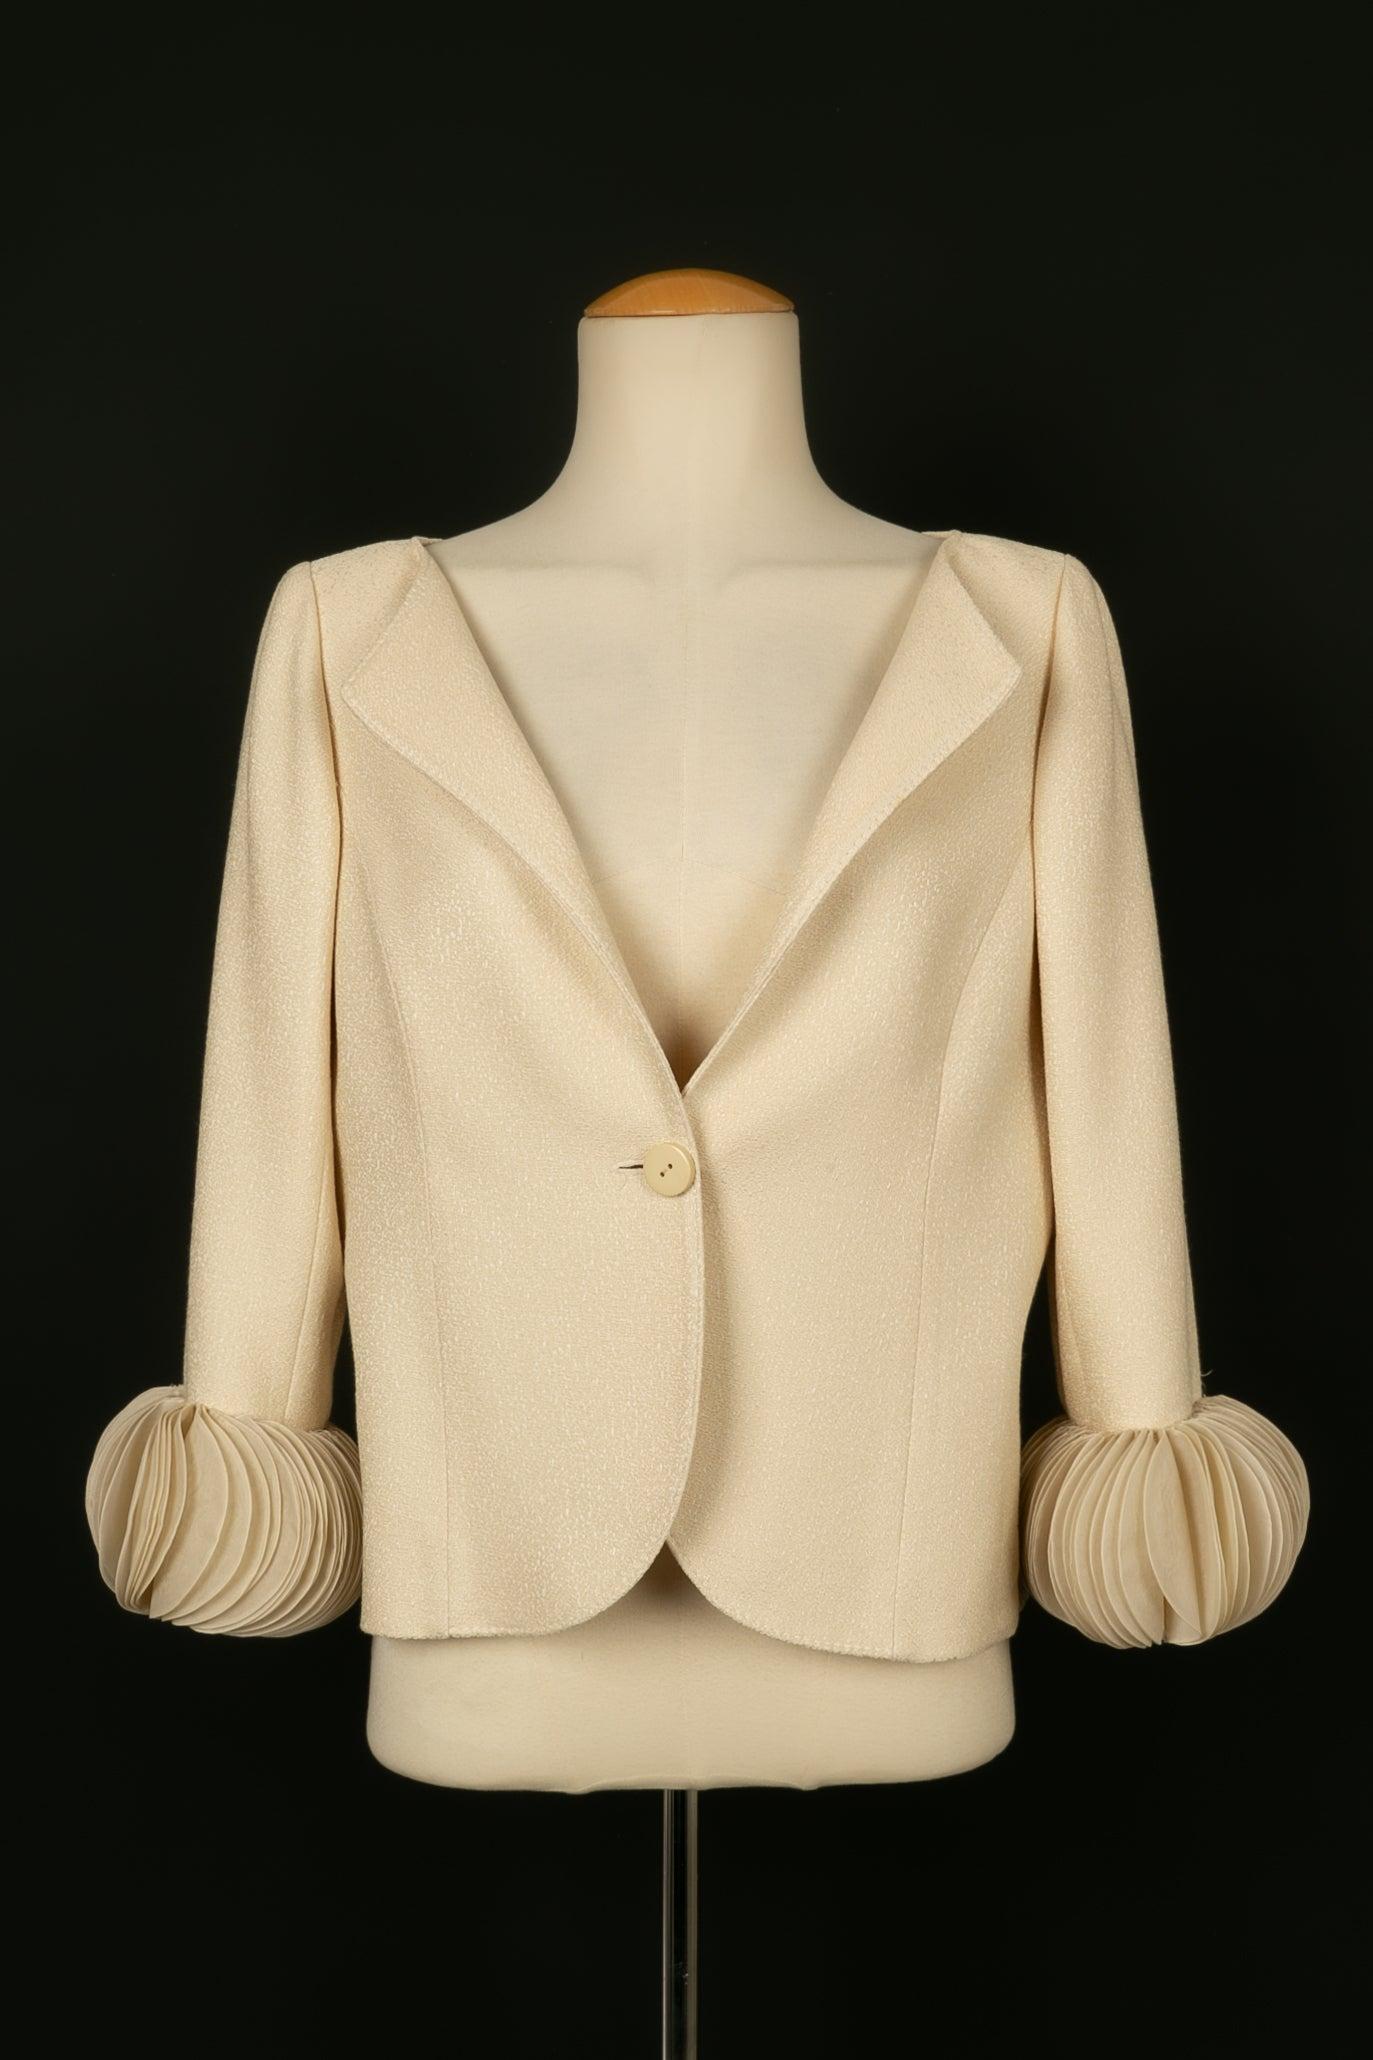 Valentino - Off-white jacket with a silk lining. No size indicated, it fits a 38FR.

Additional information:
Condition: Very good condition
Dimensions: Shoulder width: 38 cm - Chest: 53 cm - Sleeve length: 50 cm - Length: 52 cm

Seller Reference: